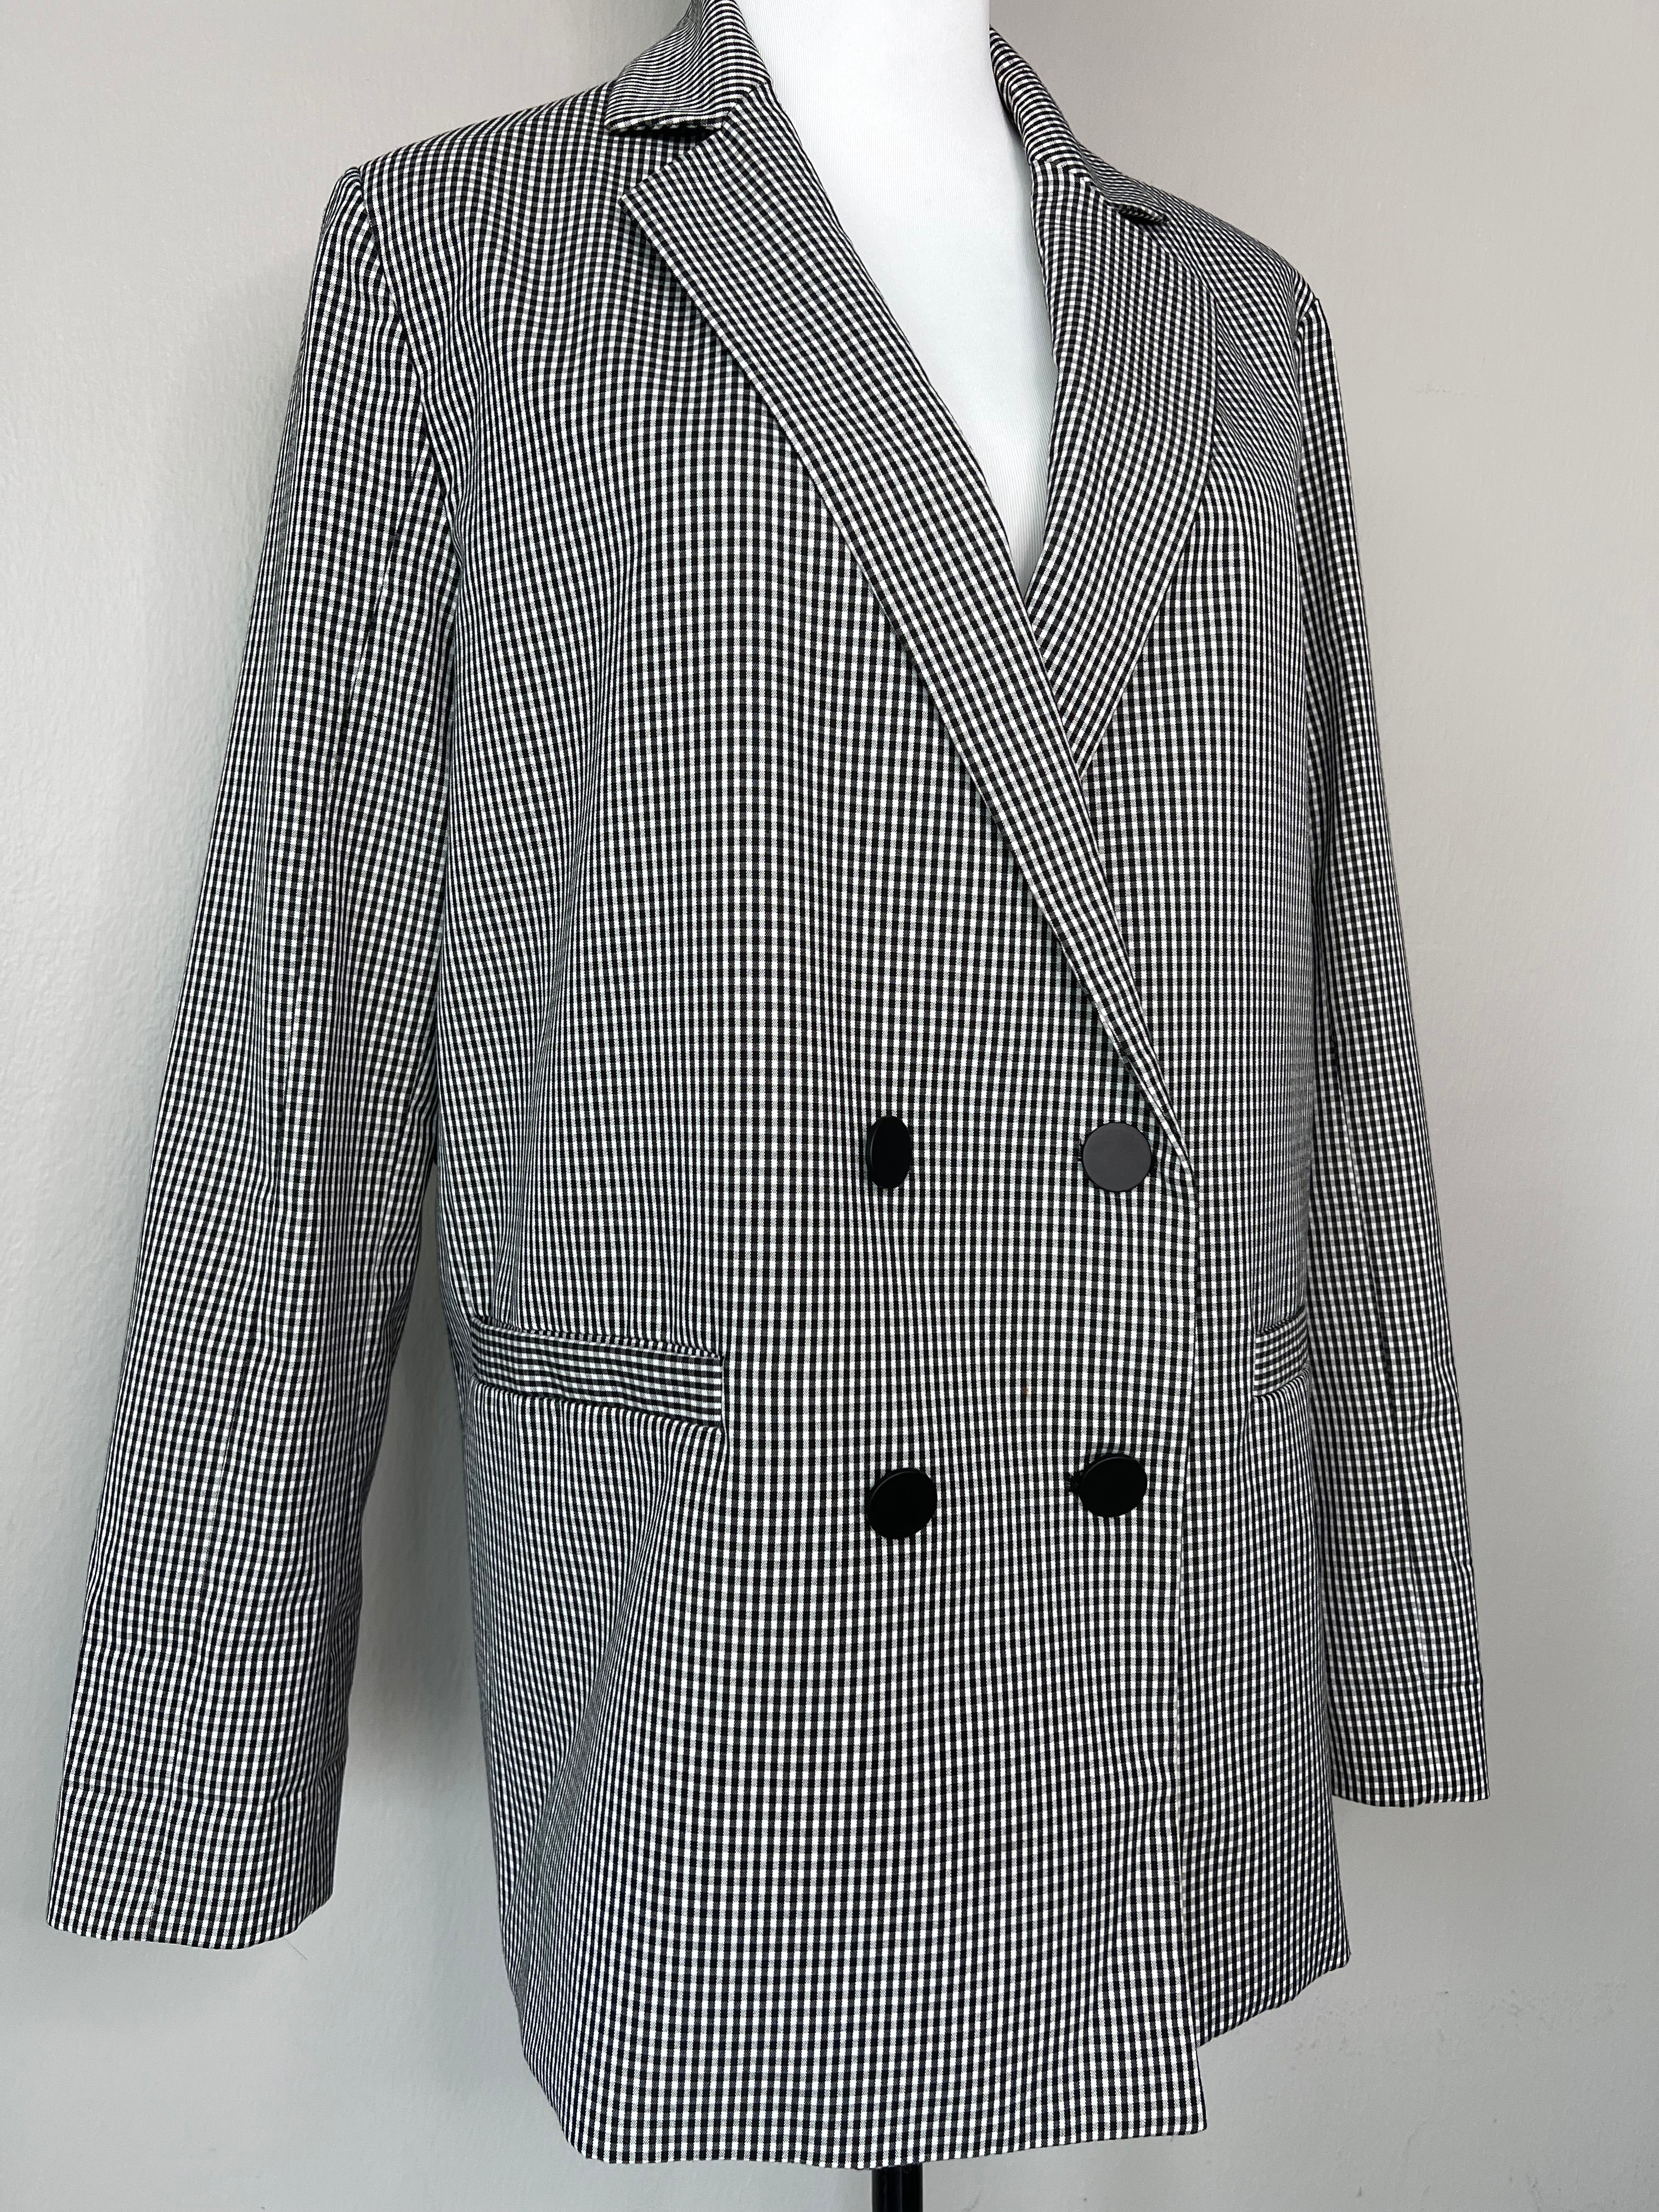 Black and white checkered blazer with big black buttons. - EMPERIAL